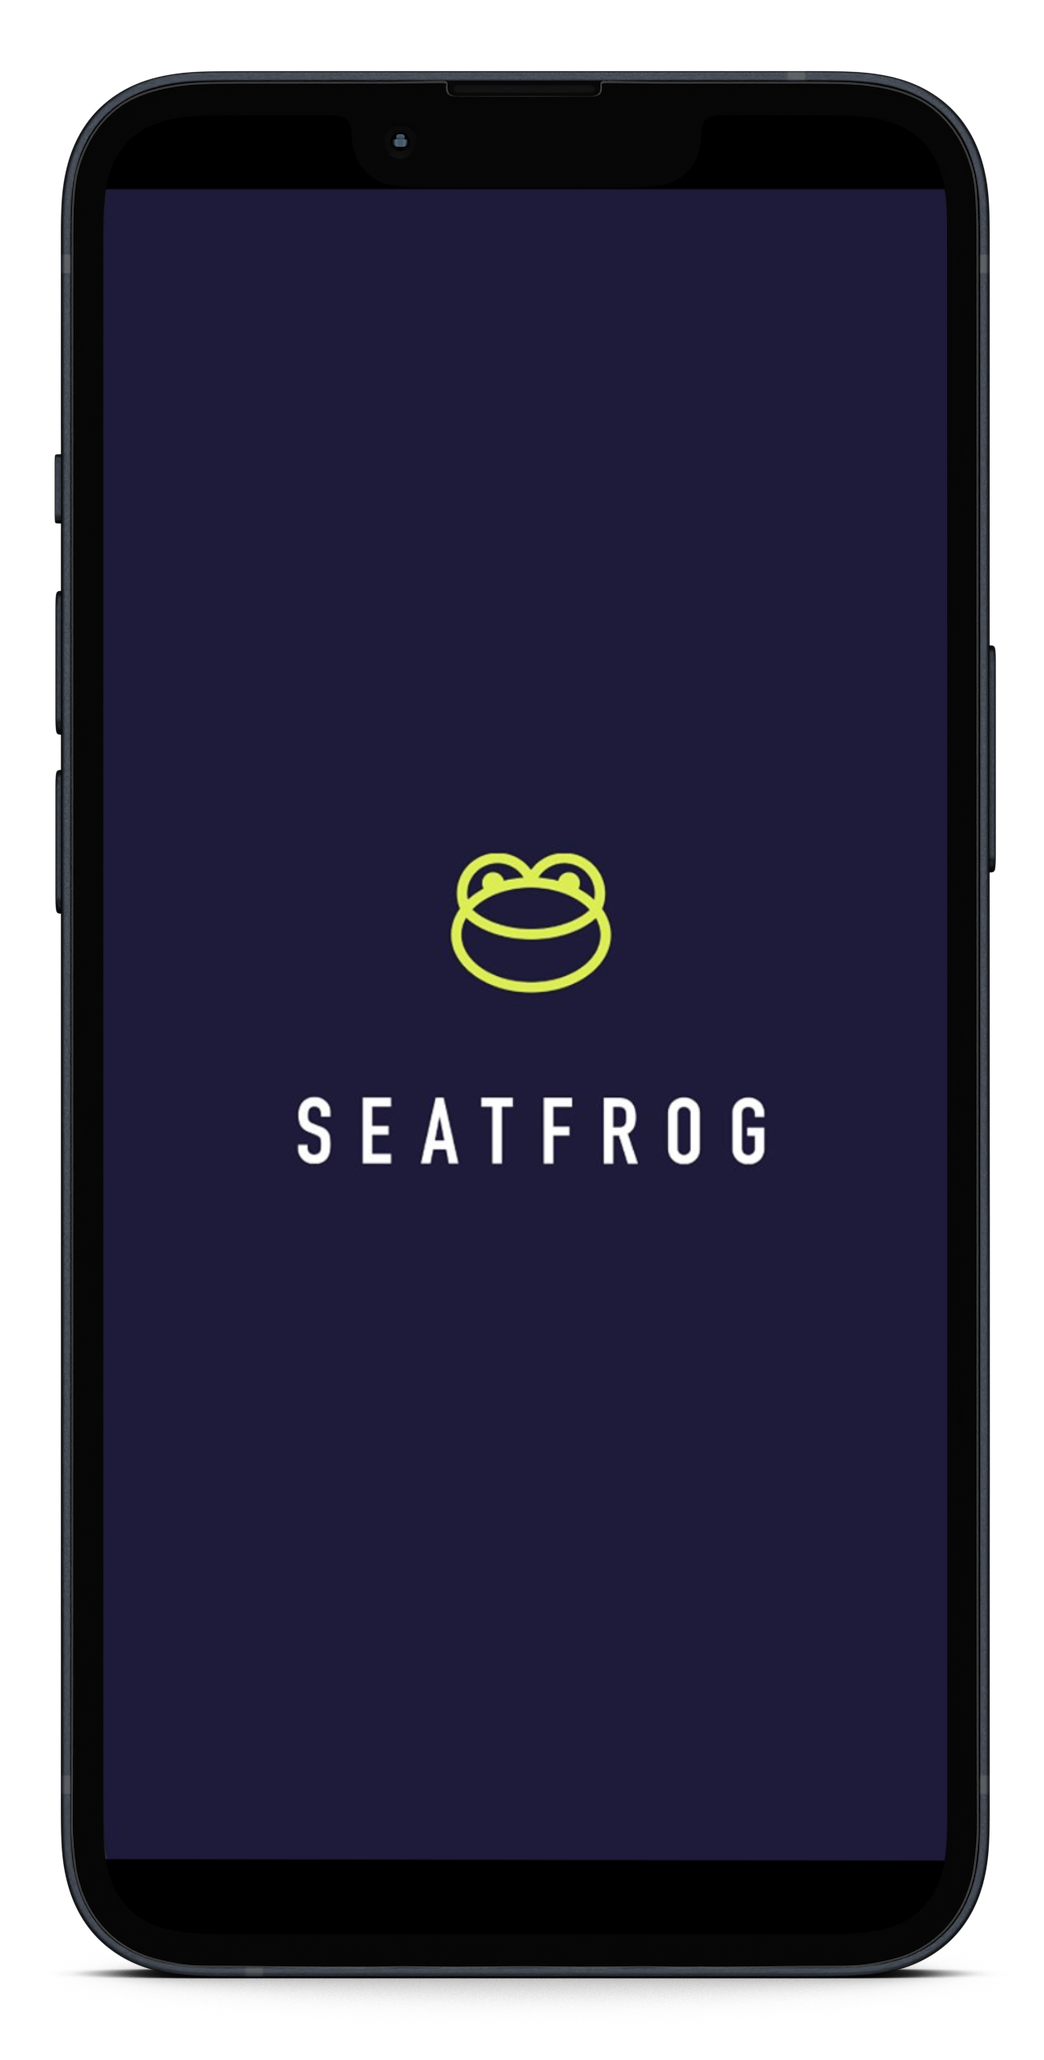 Cheap first class upgrades with Seatfrog